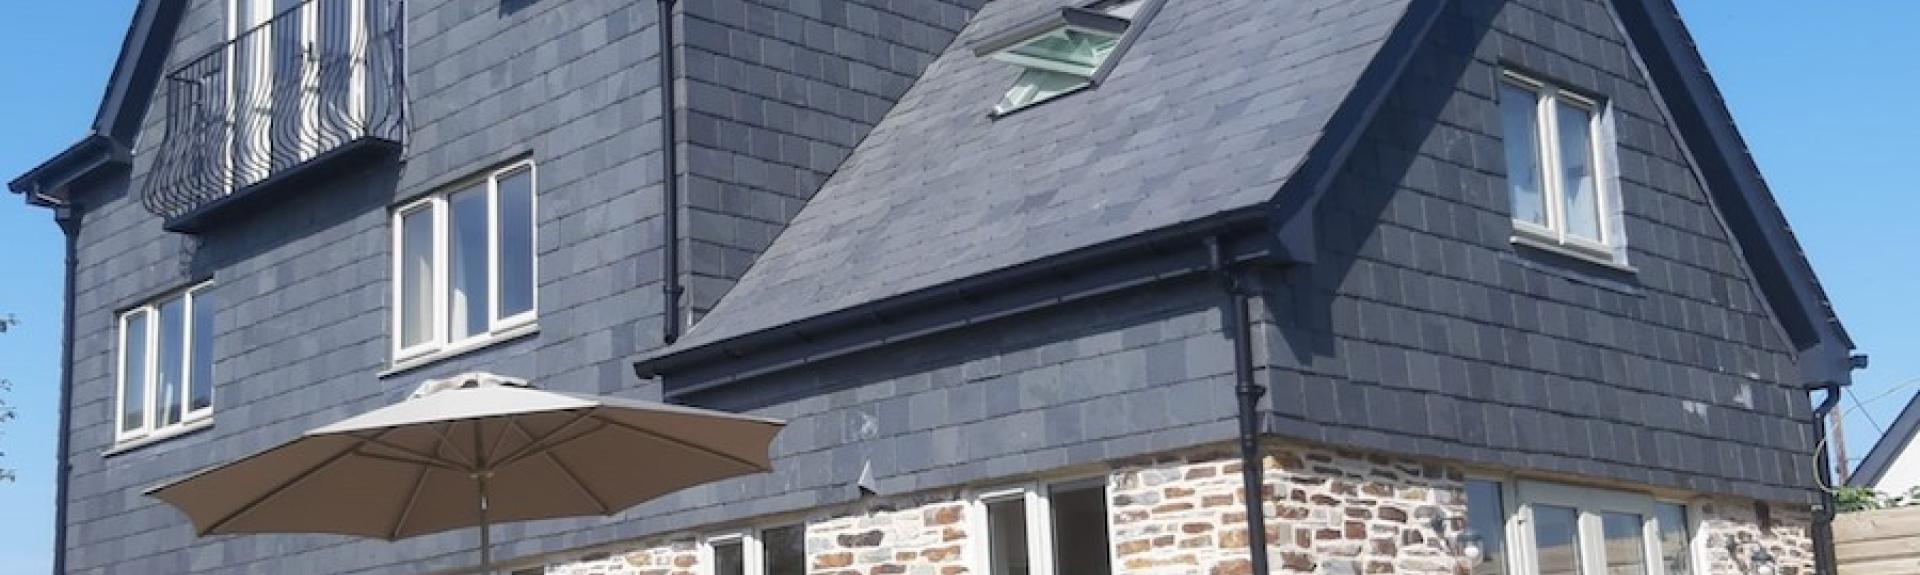 A large, 3-storey detached house built of stone with a 1st floor clad in slates.